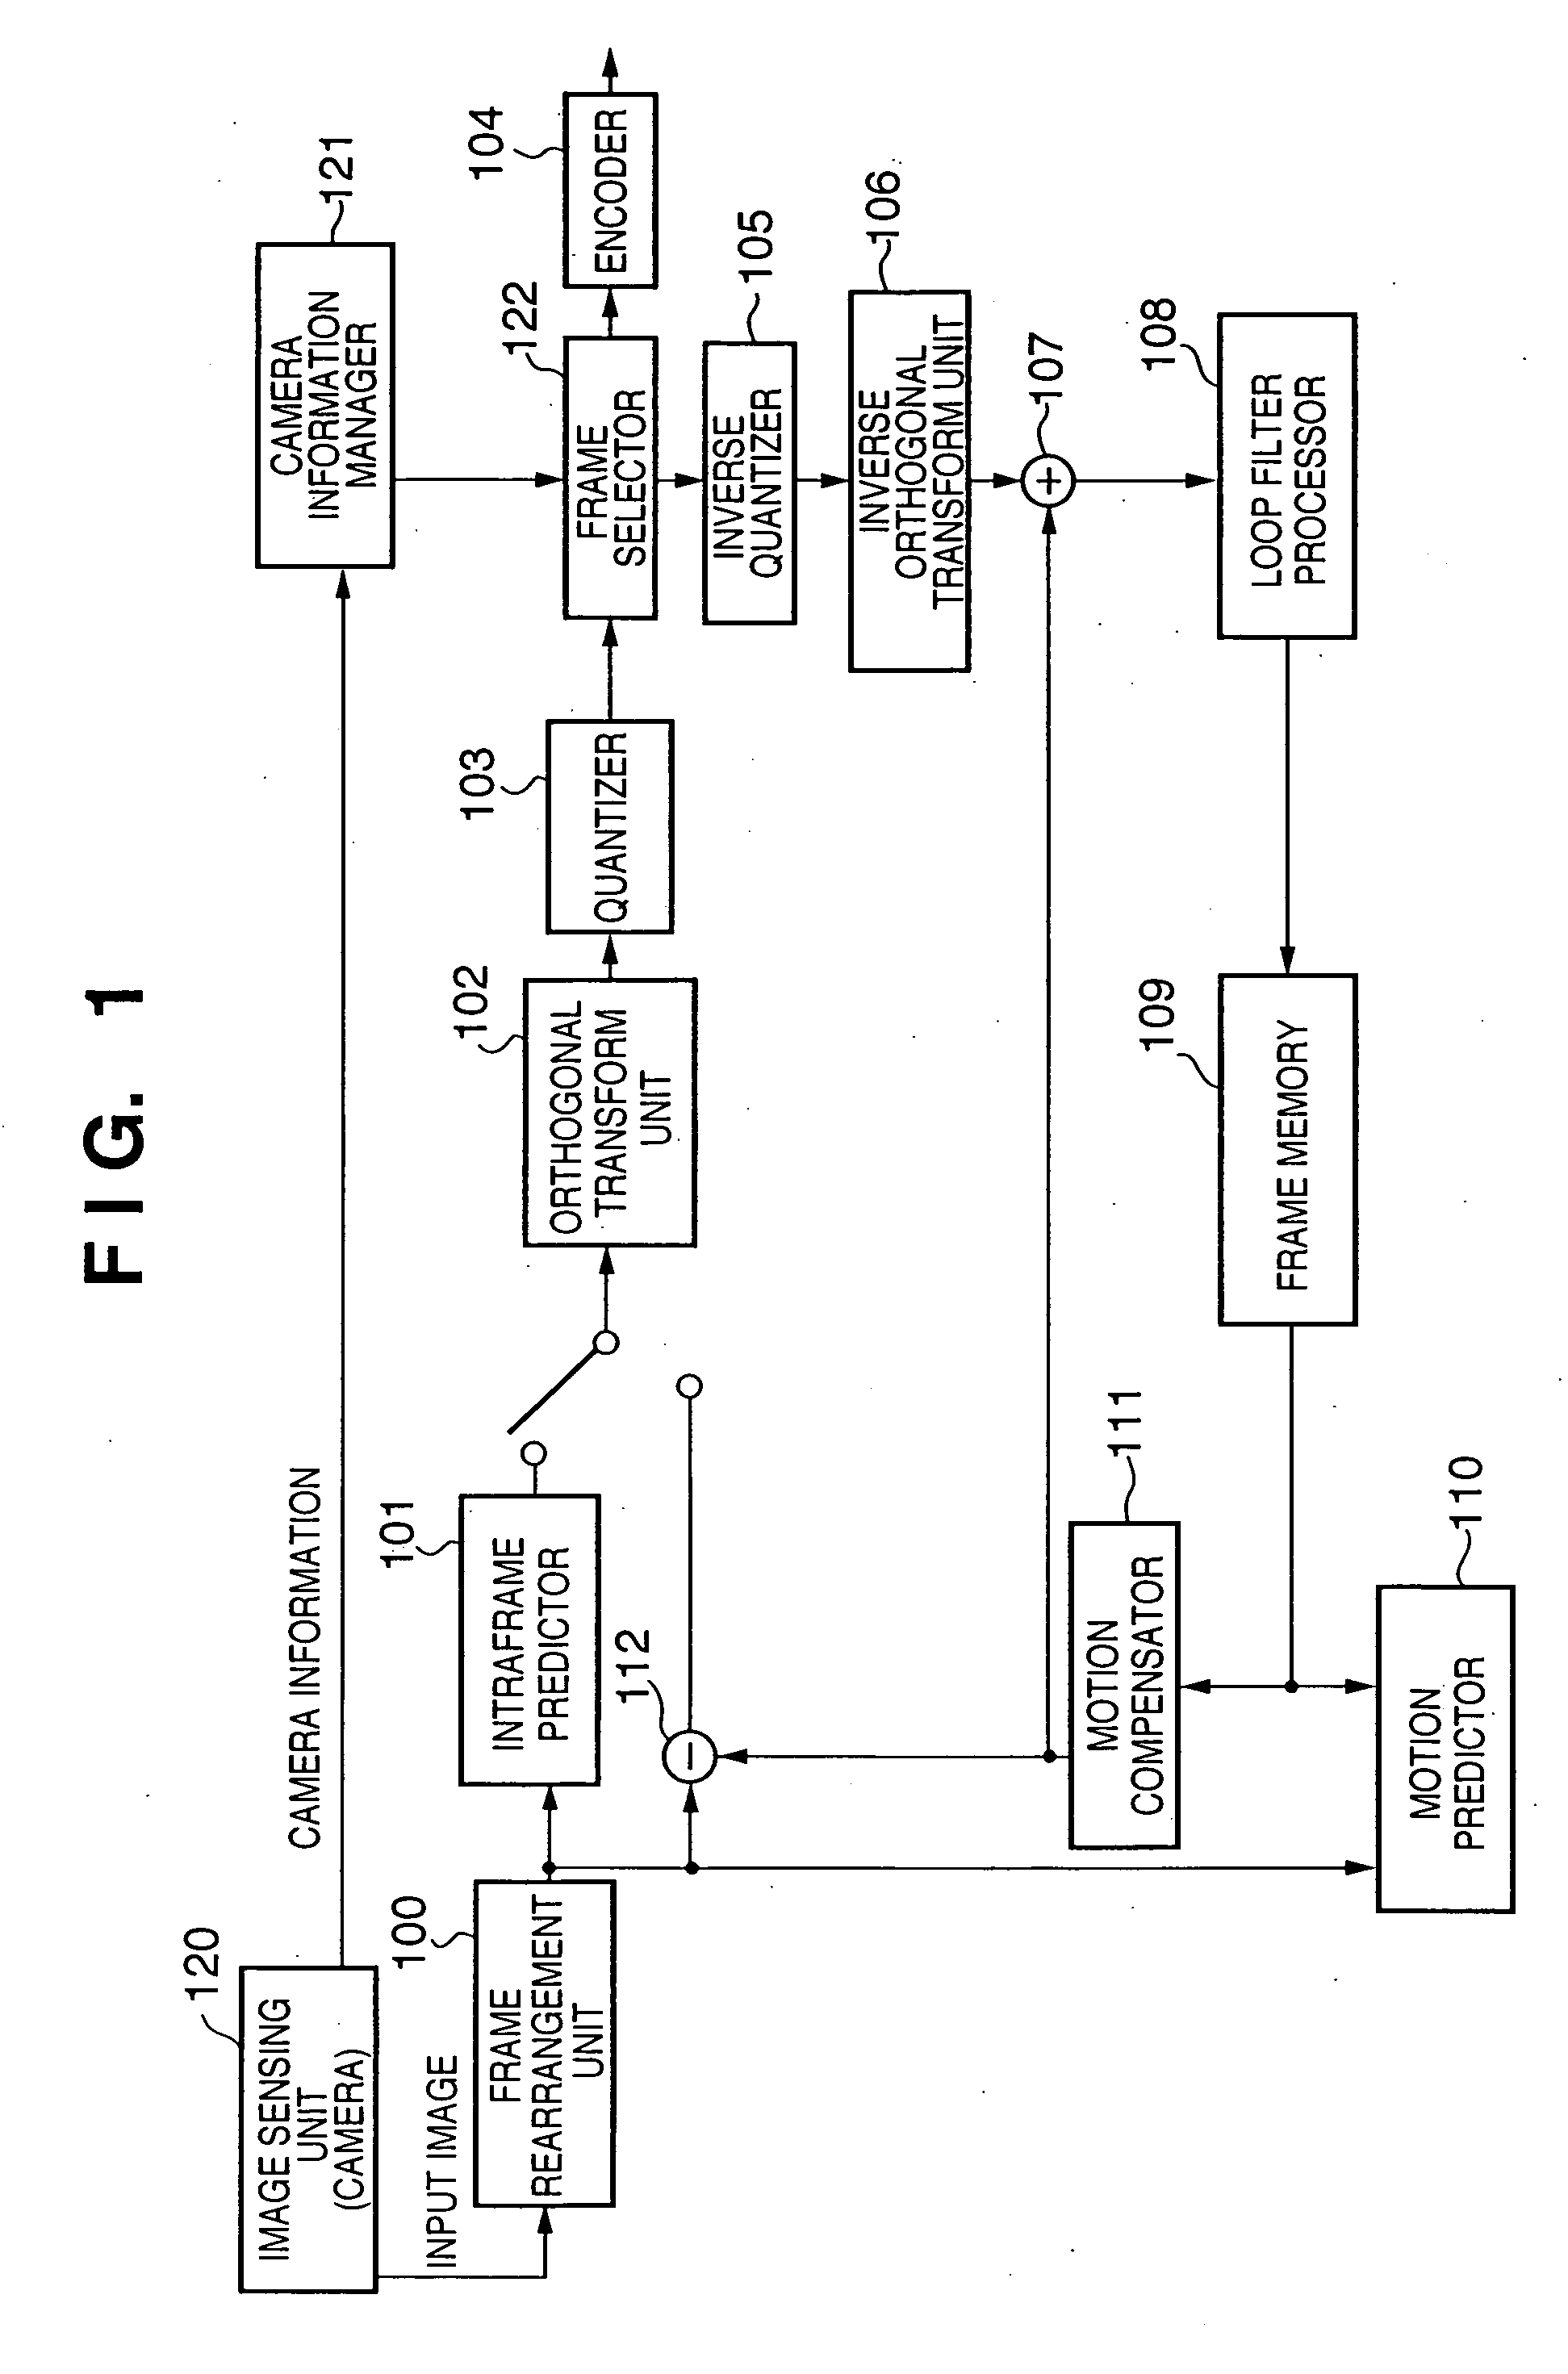 Moving image encoding apparatus and control method therefor